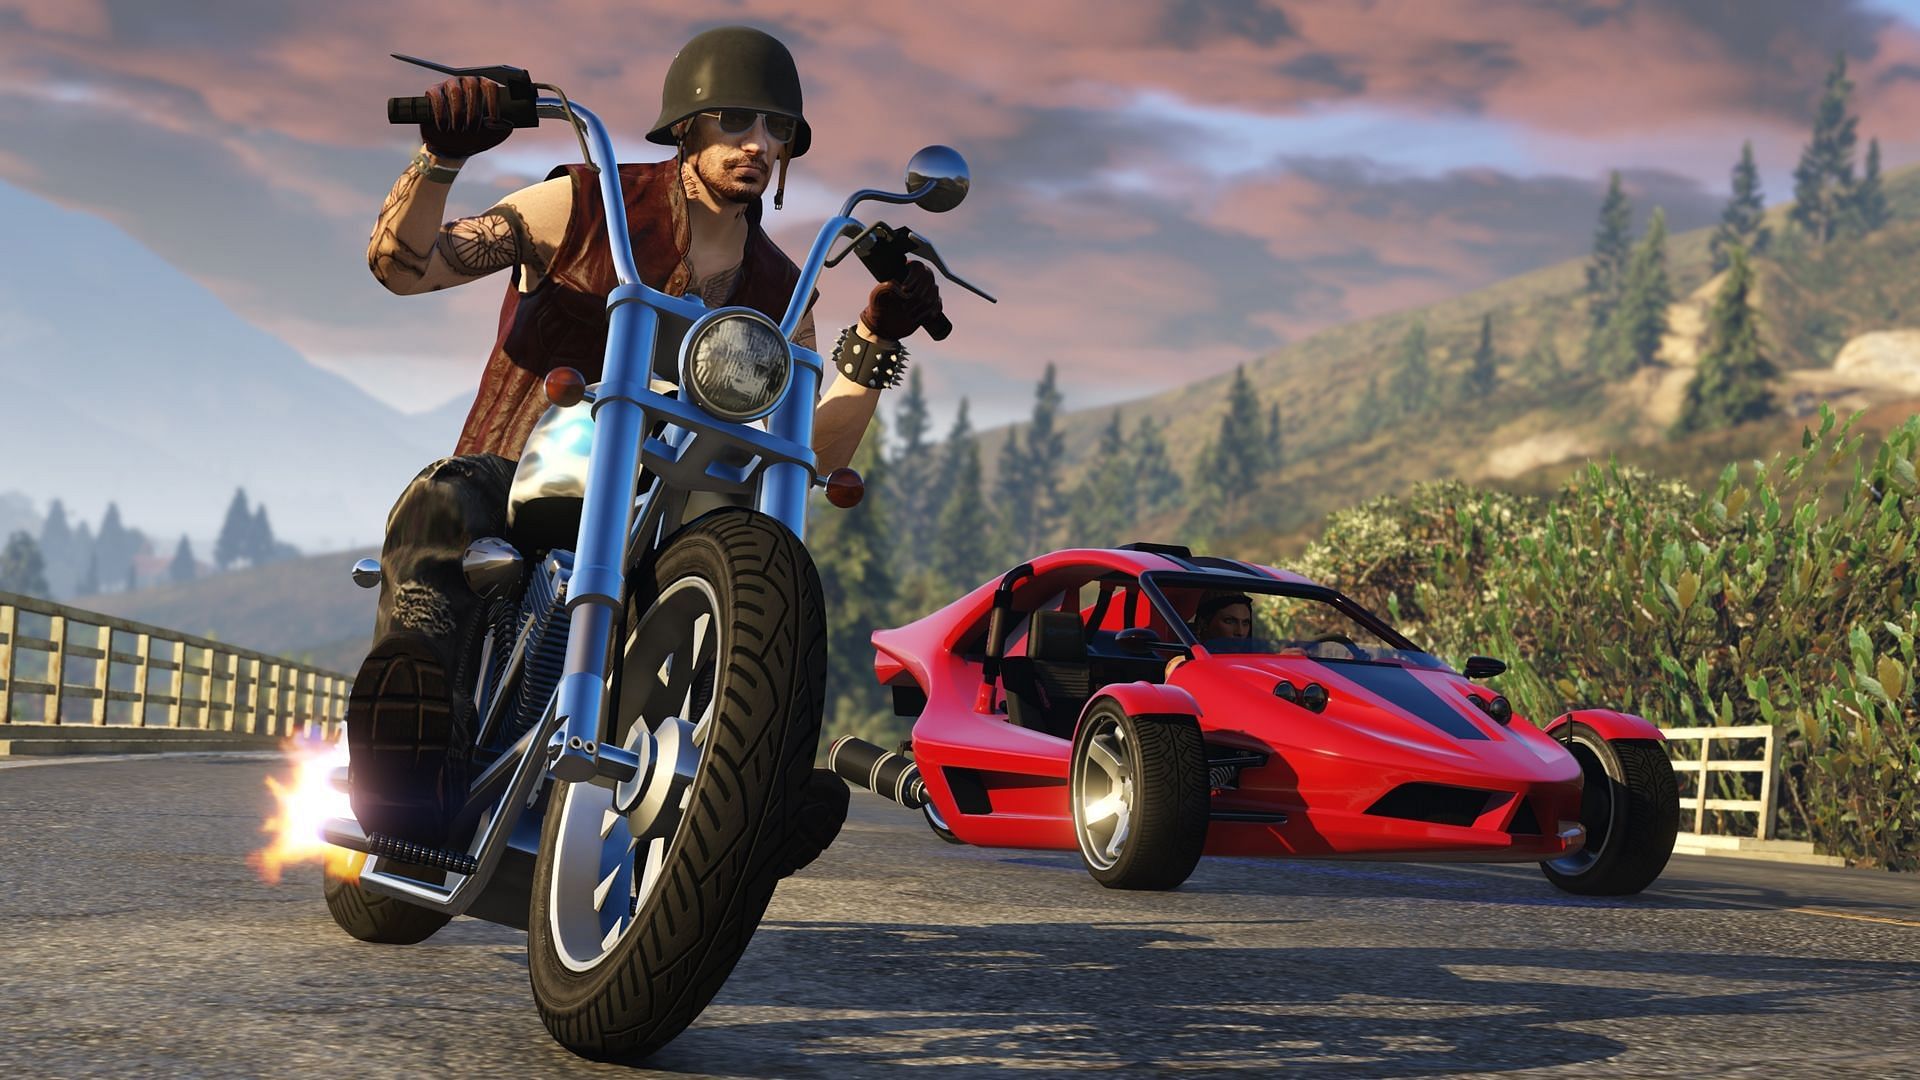 Analysis of the top 5 fastest motorcycles in GTA Online (Image via Rockstar Games)